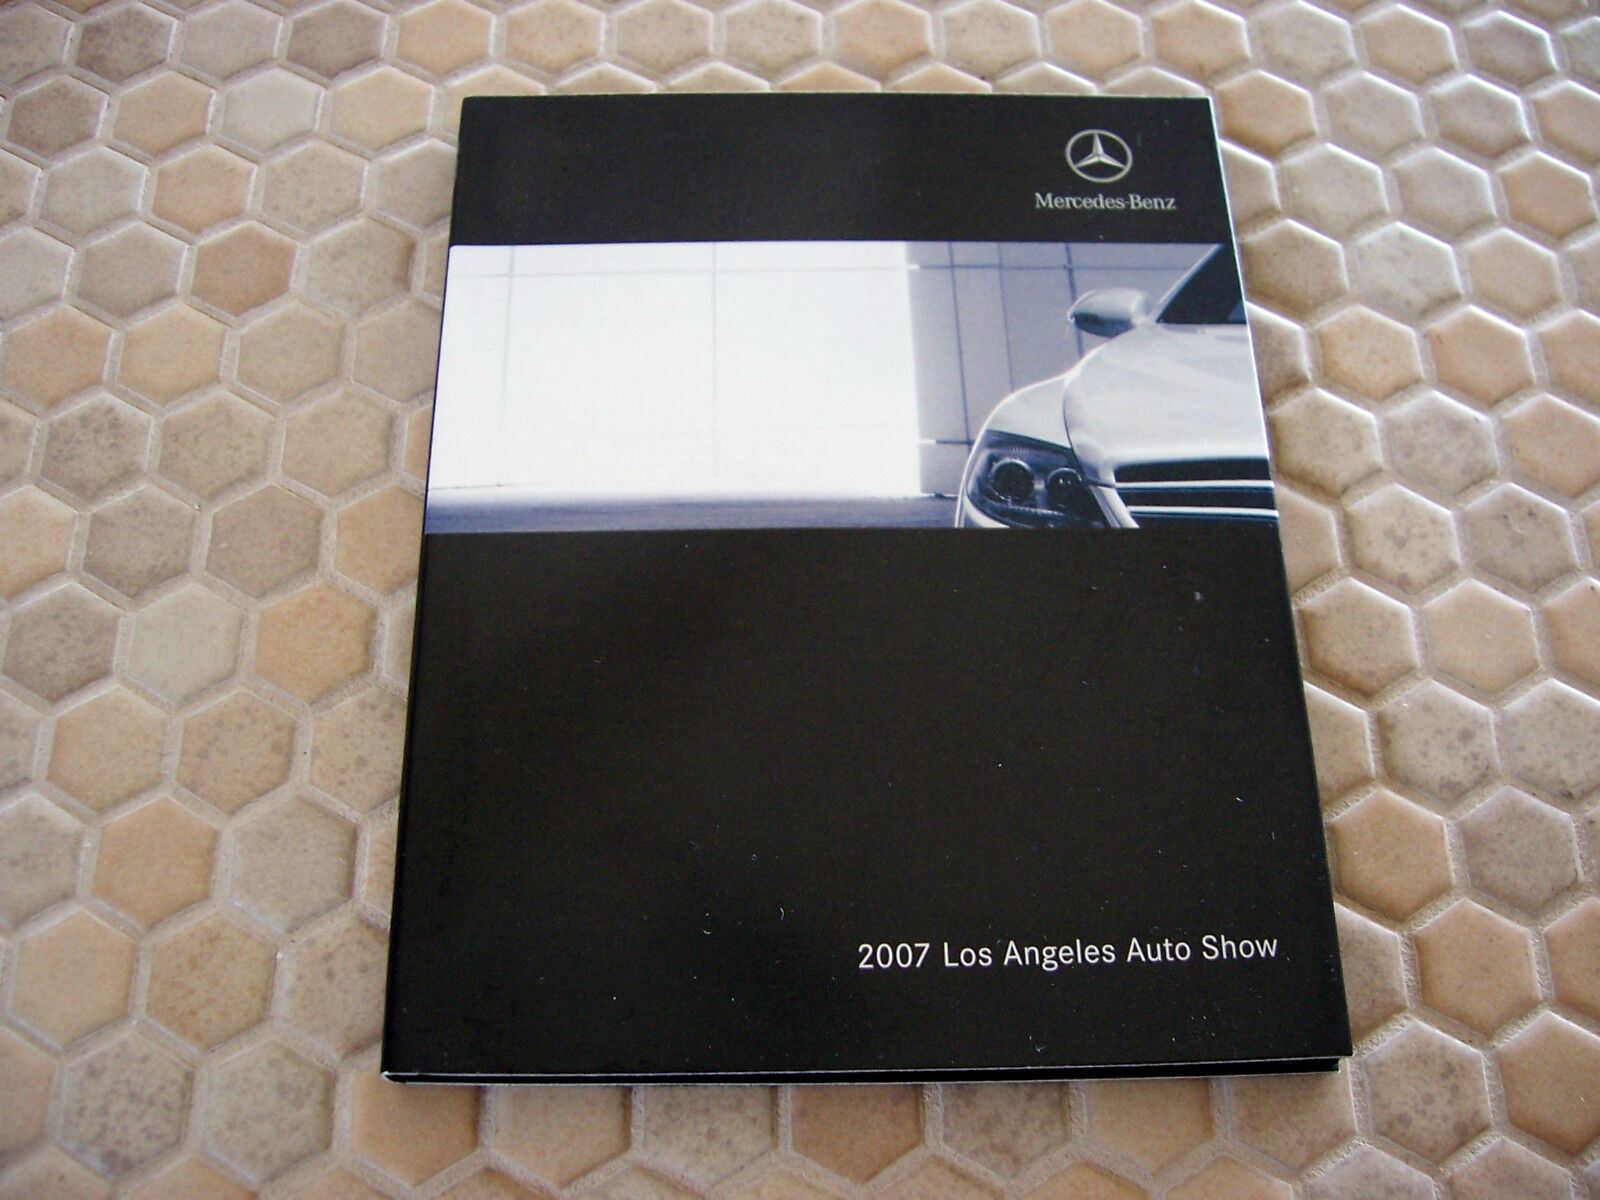 MERCEDES BENZ AND MAYBACH OFFICIAL FULL LINE PRESS CD 2007 USA EDITION